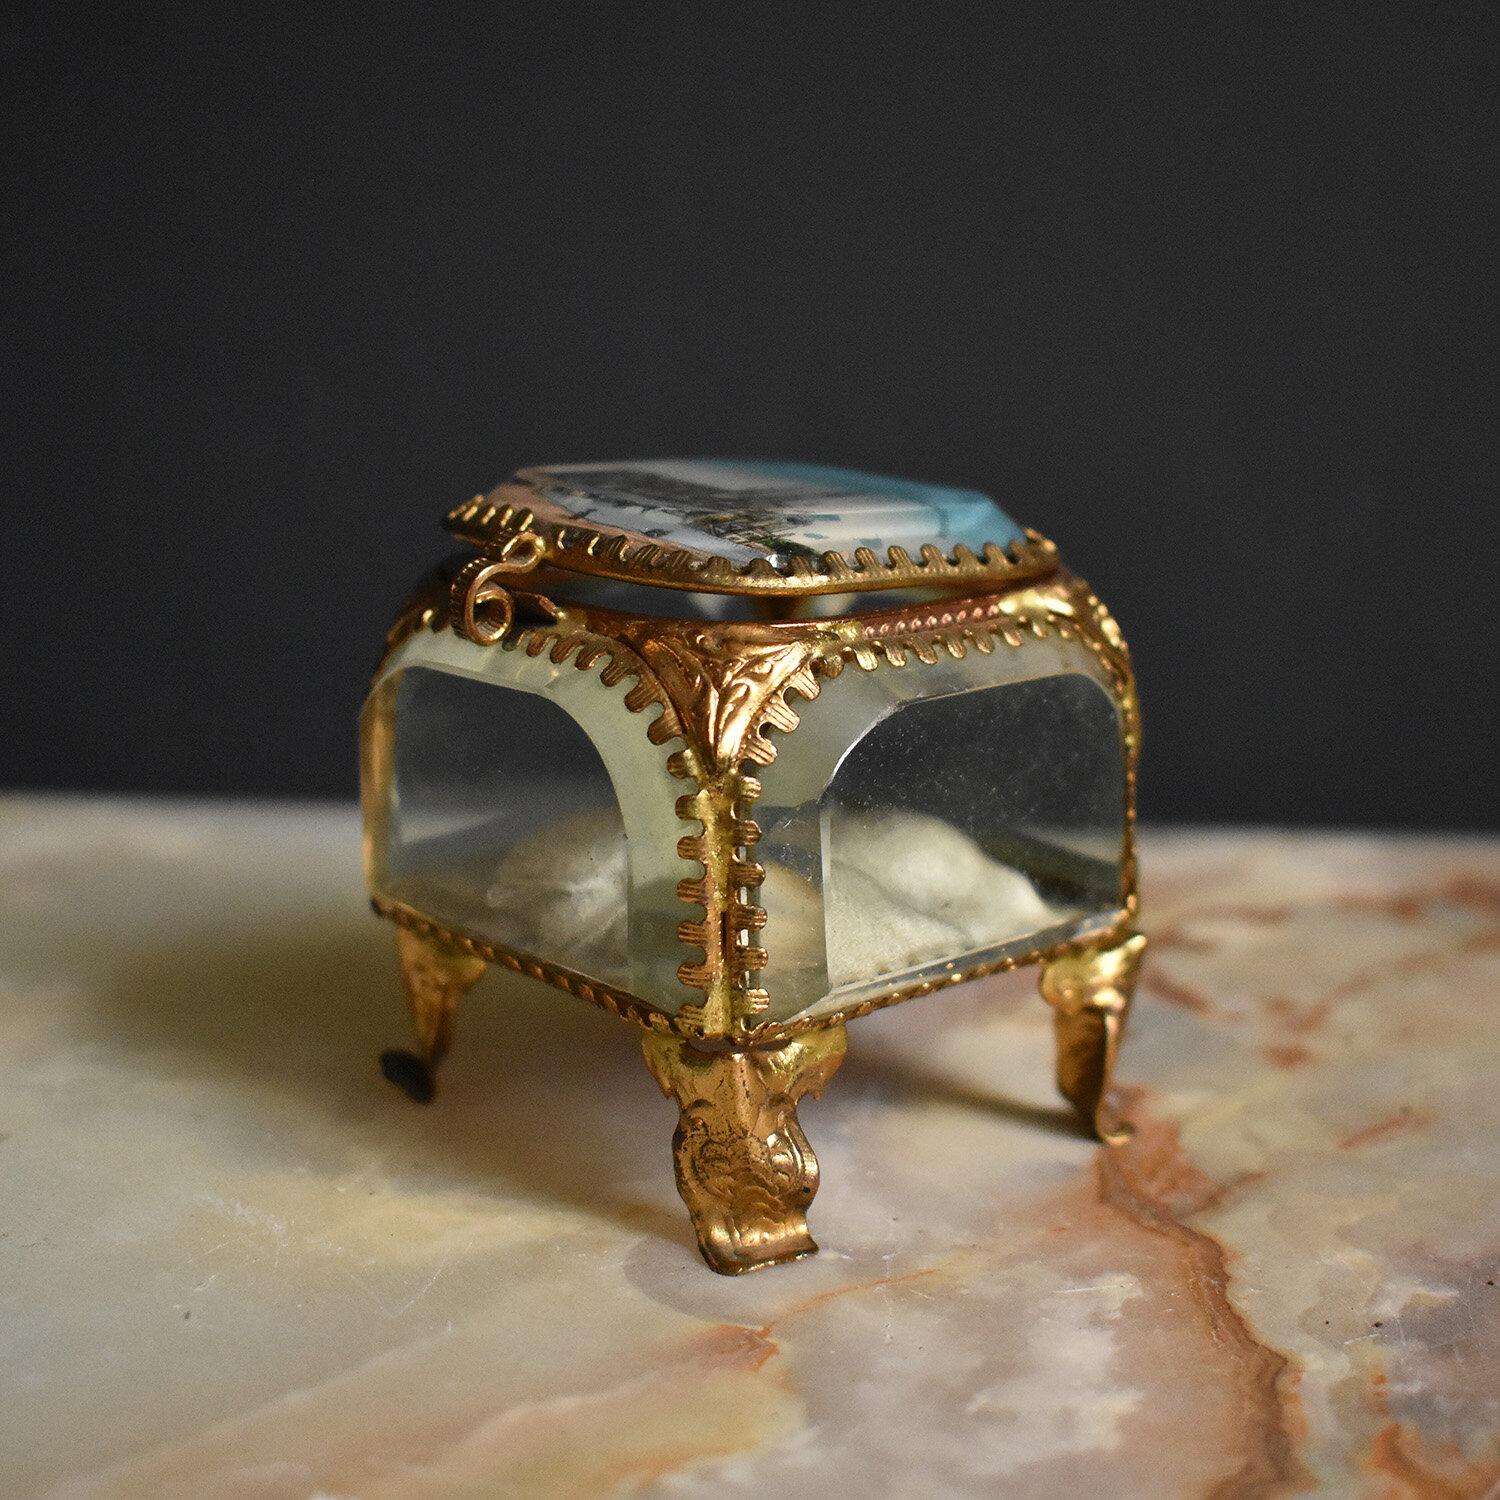 Antique French Gilt Brass and Cut Glass Souvenir Jewellery Casket, 19th Century In Good Condition For Sale In Bristol, GB